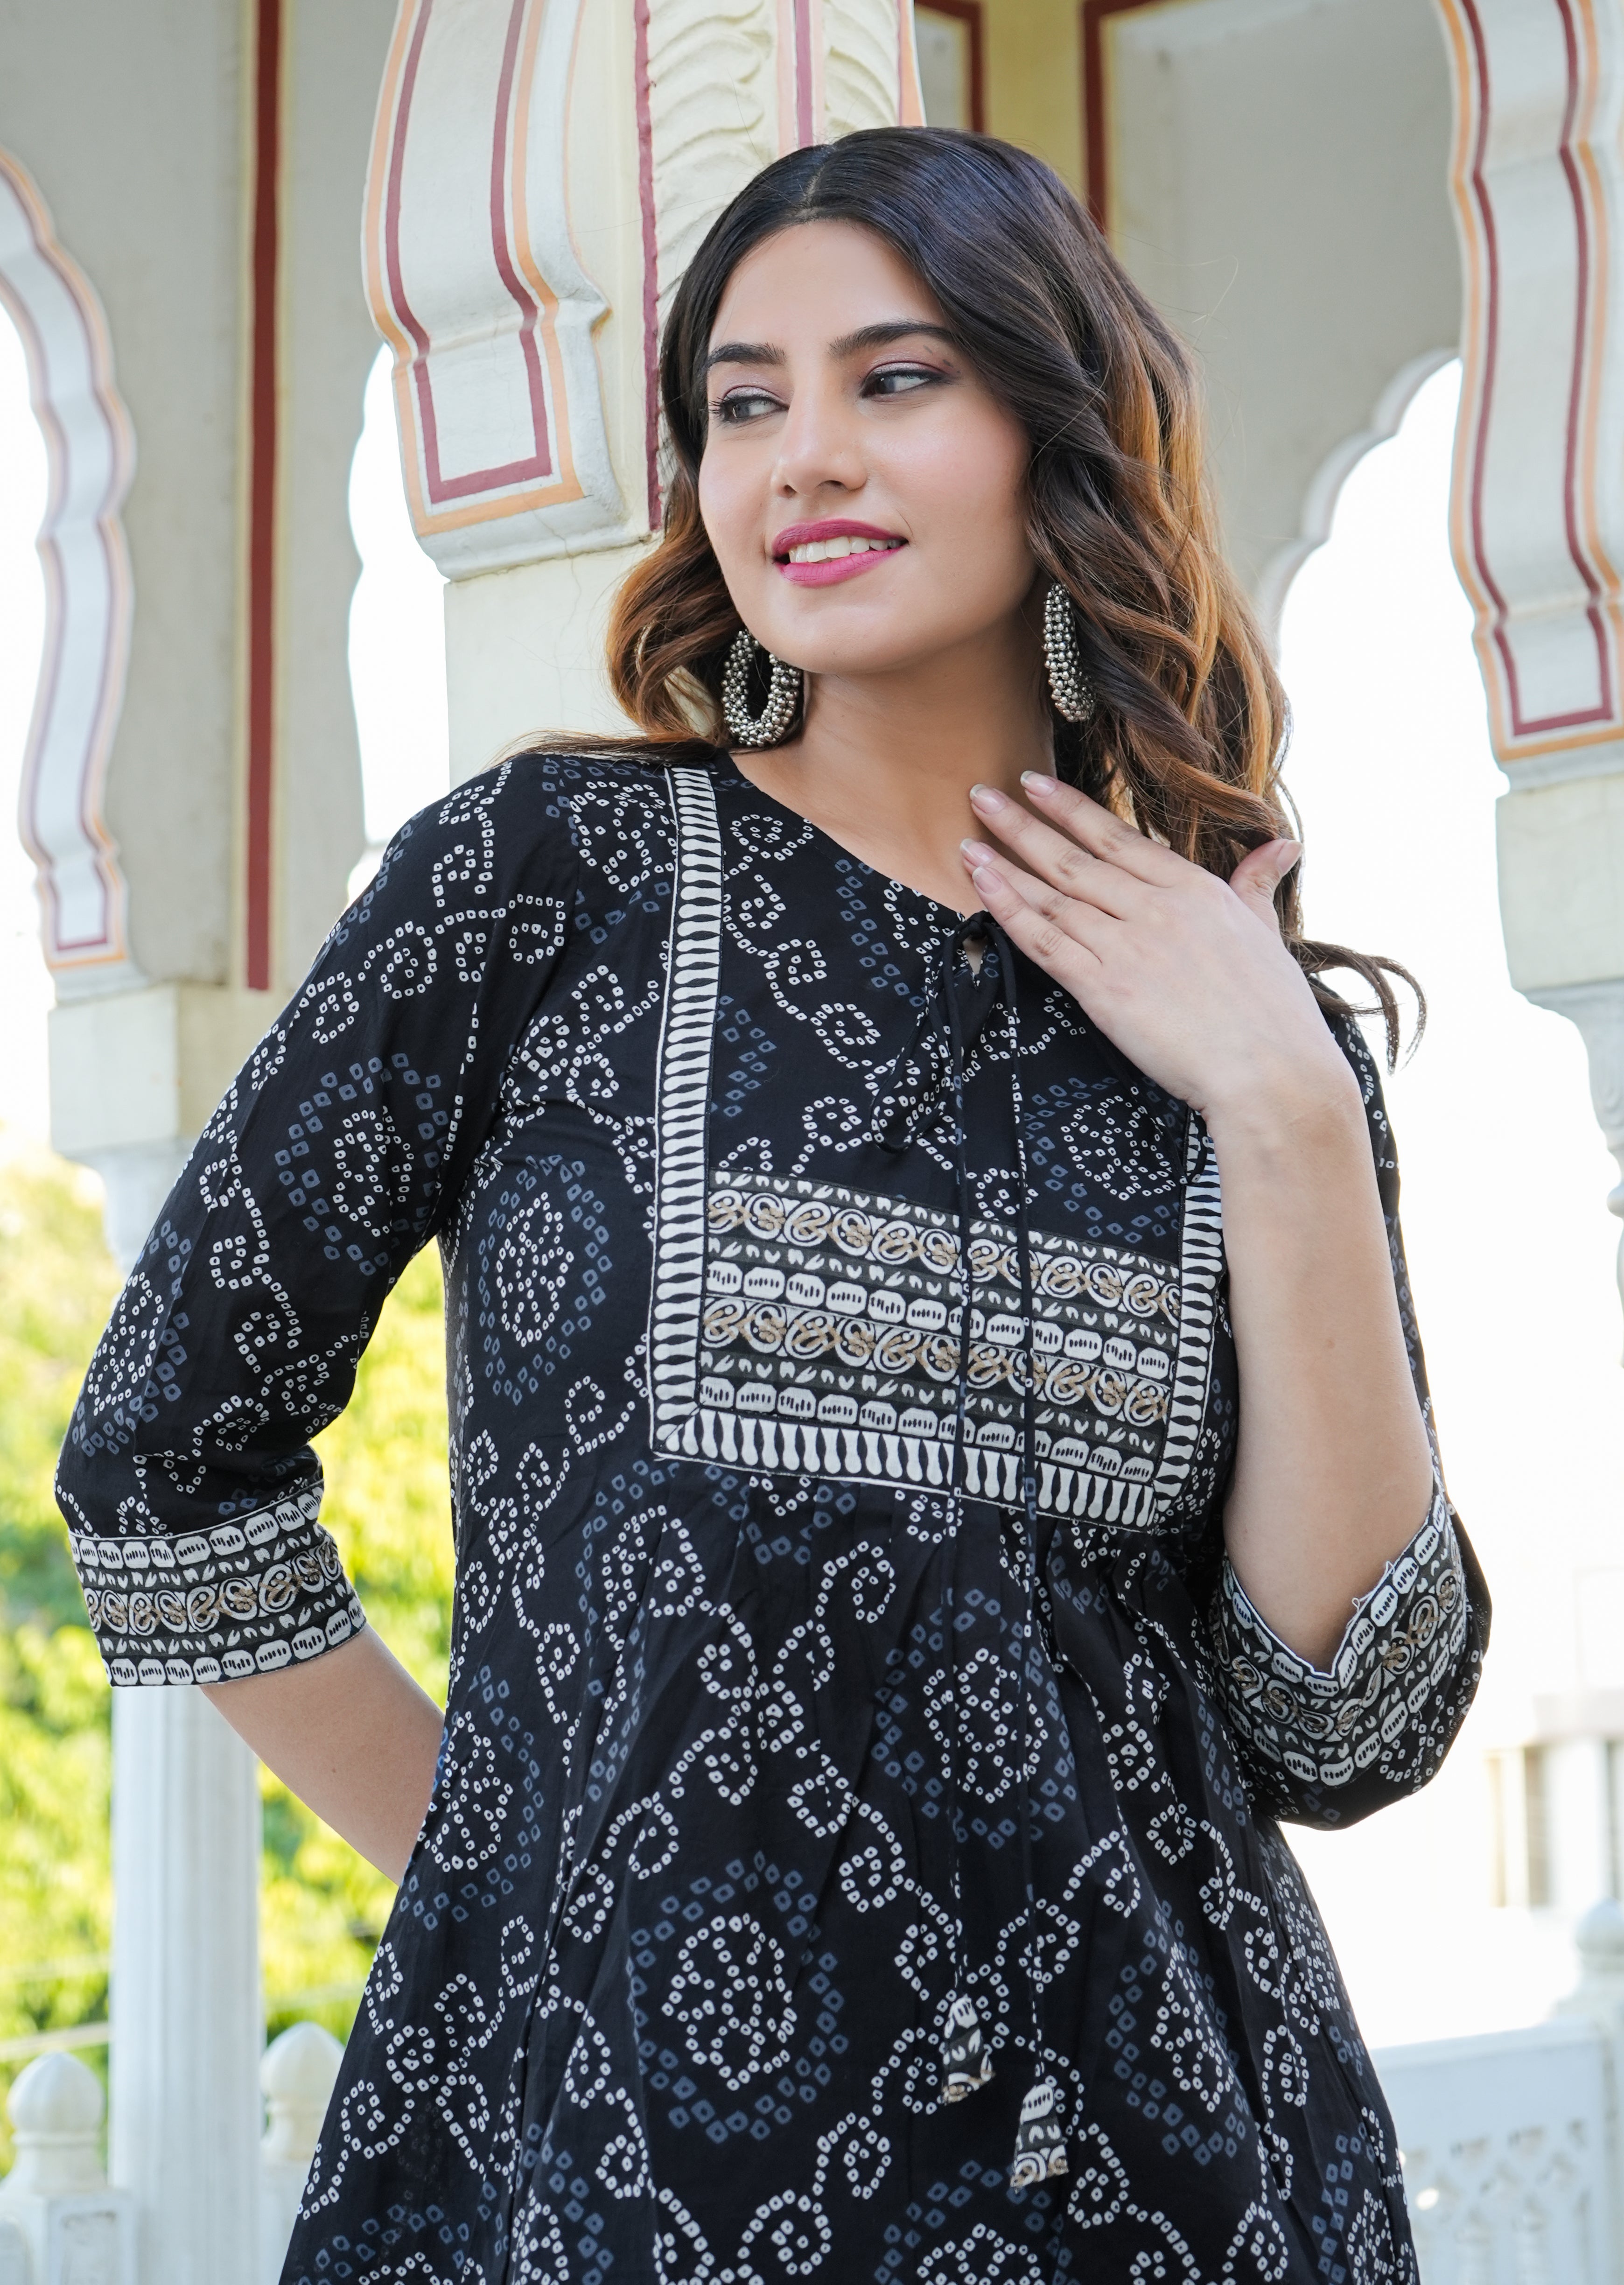 Shop Online Casual Kurti Embroidered Cotton in Black : 259562 - Kurtis